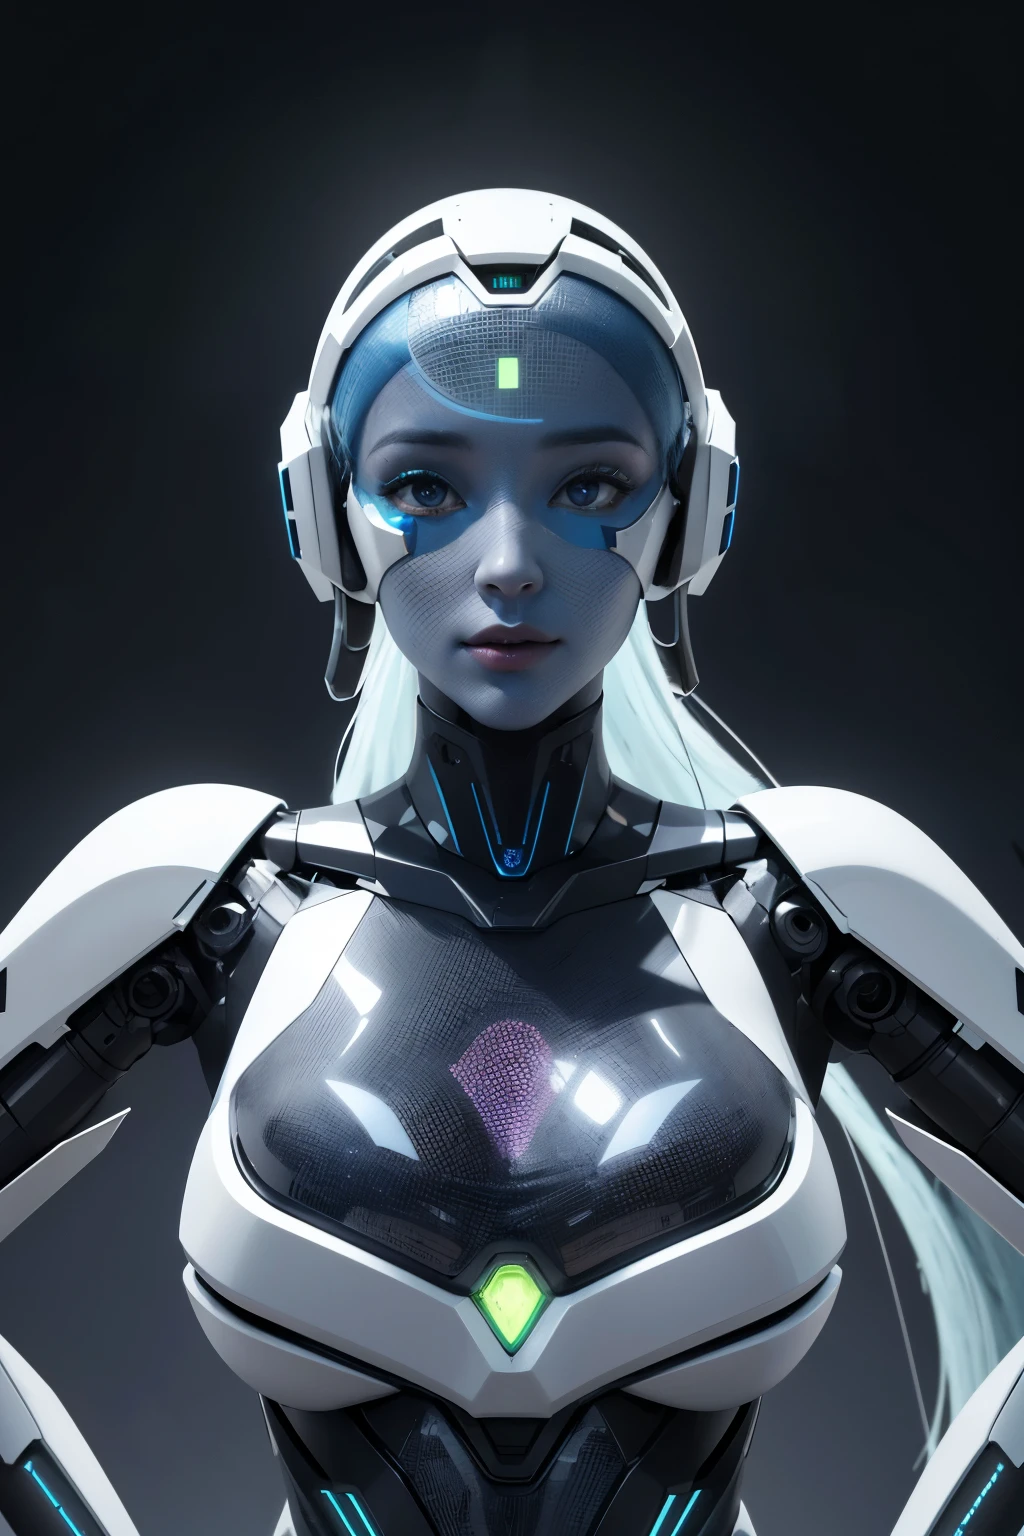 highly sofisticated robot from far future, not ordinary, made out of mirriad of futuristic parts, both holographic and physical, hyperealistic, 8k, photo realistic